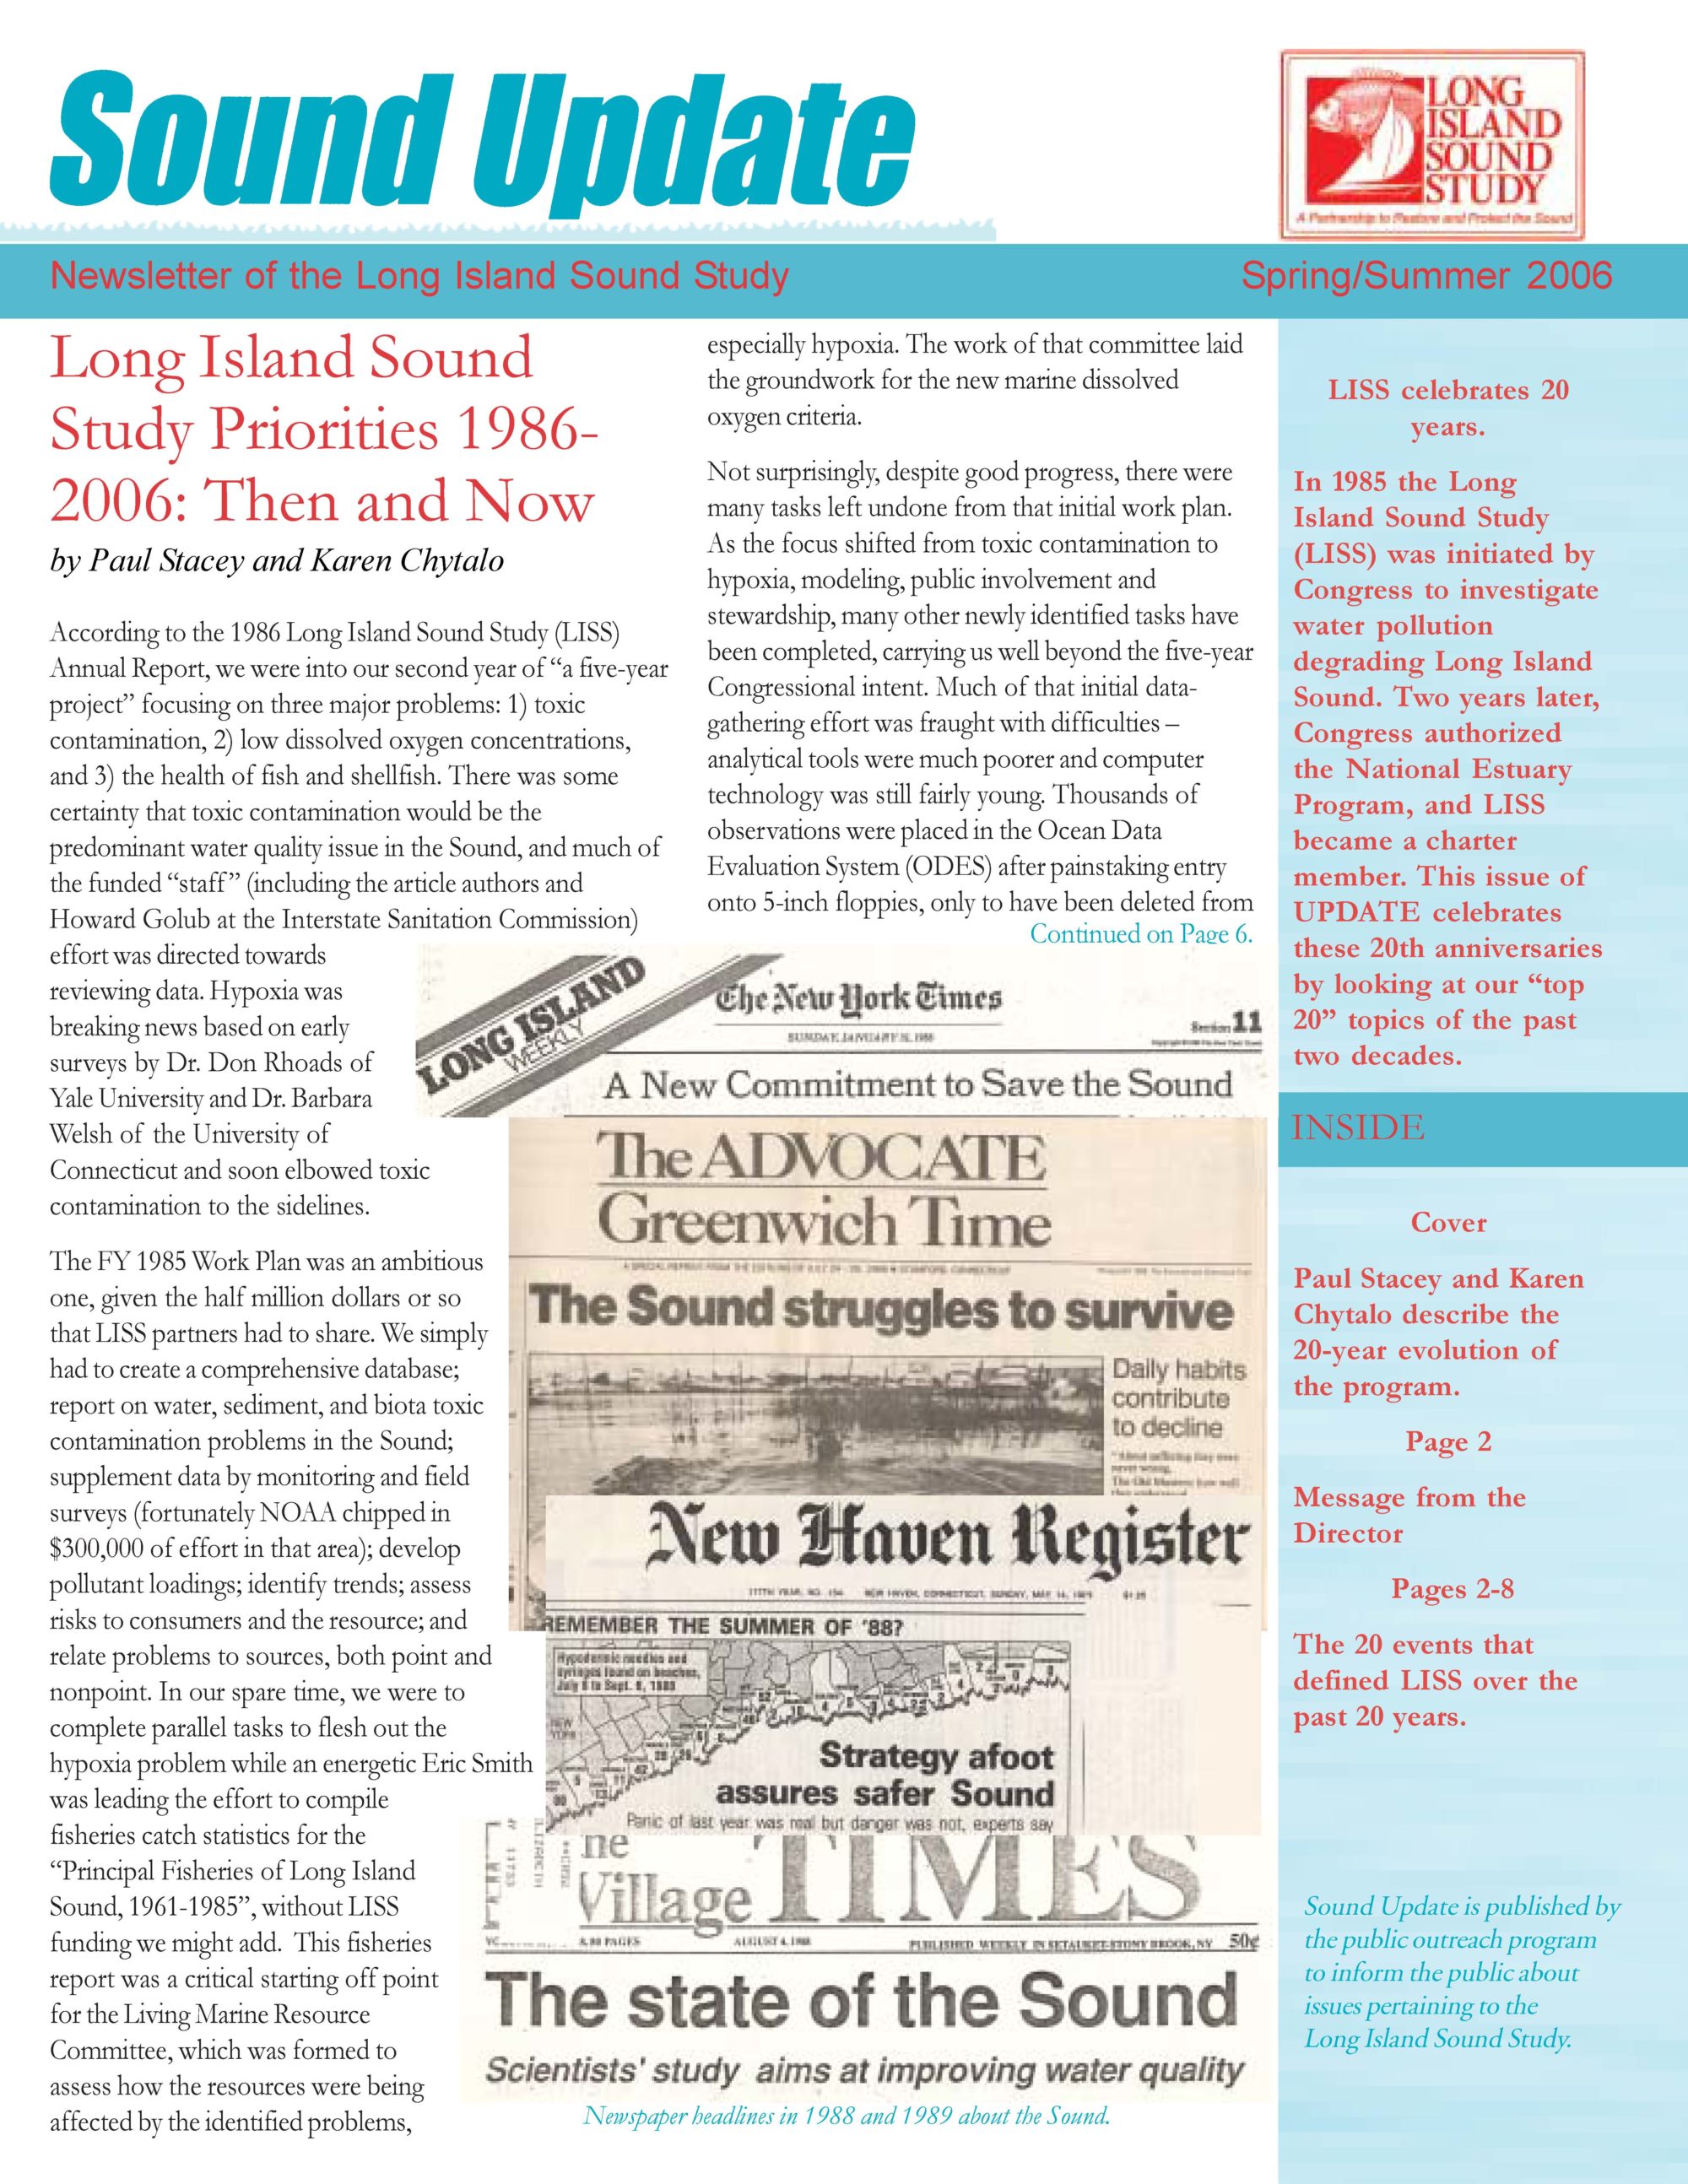 A special edition of the Sound Update from 2000s, an older version of the Long Island Sound Study newsletter, celebrates the 20th anniversary of the Long Island Sound Study by featuring clippings from old newsletters. 